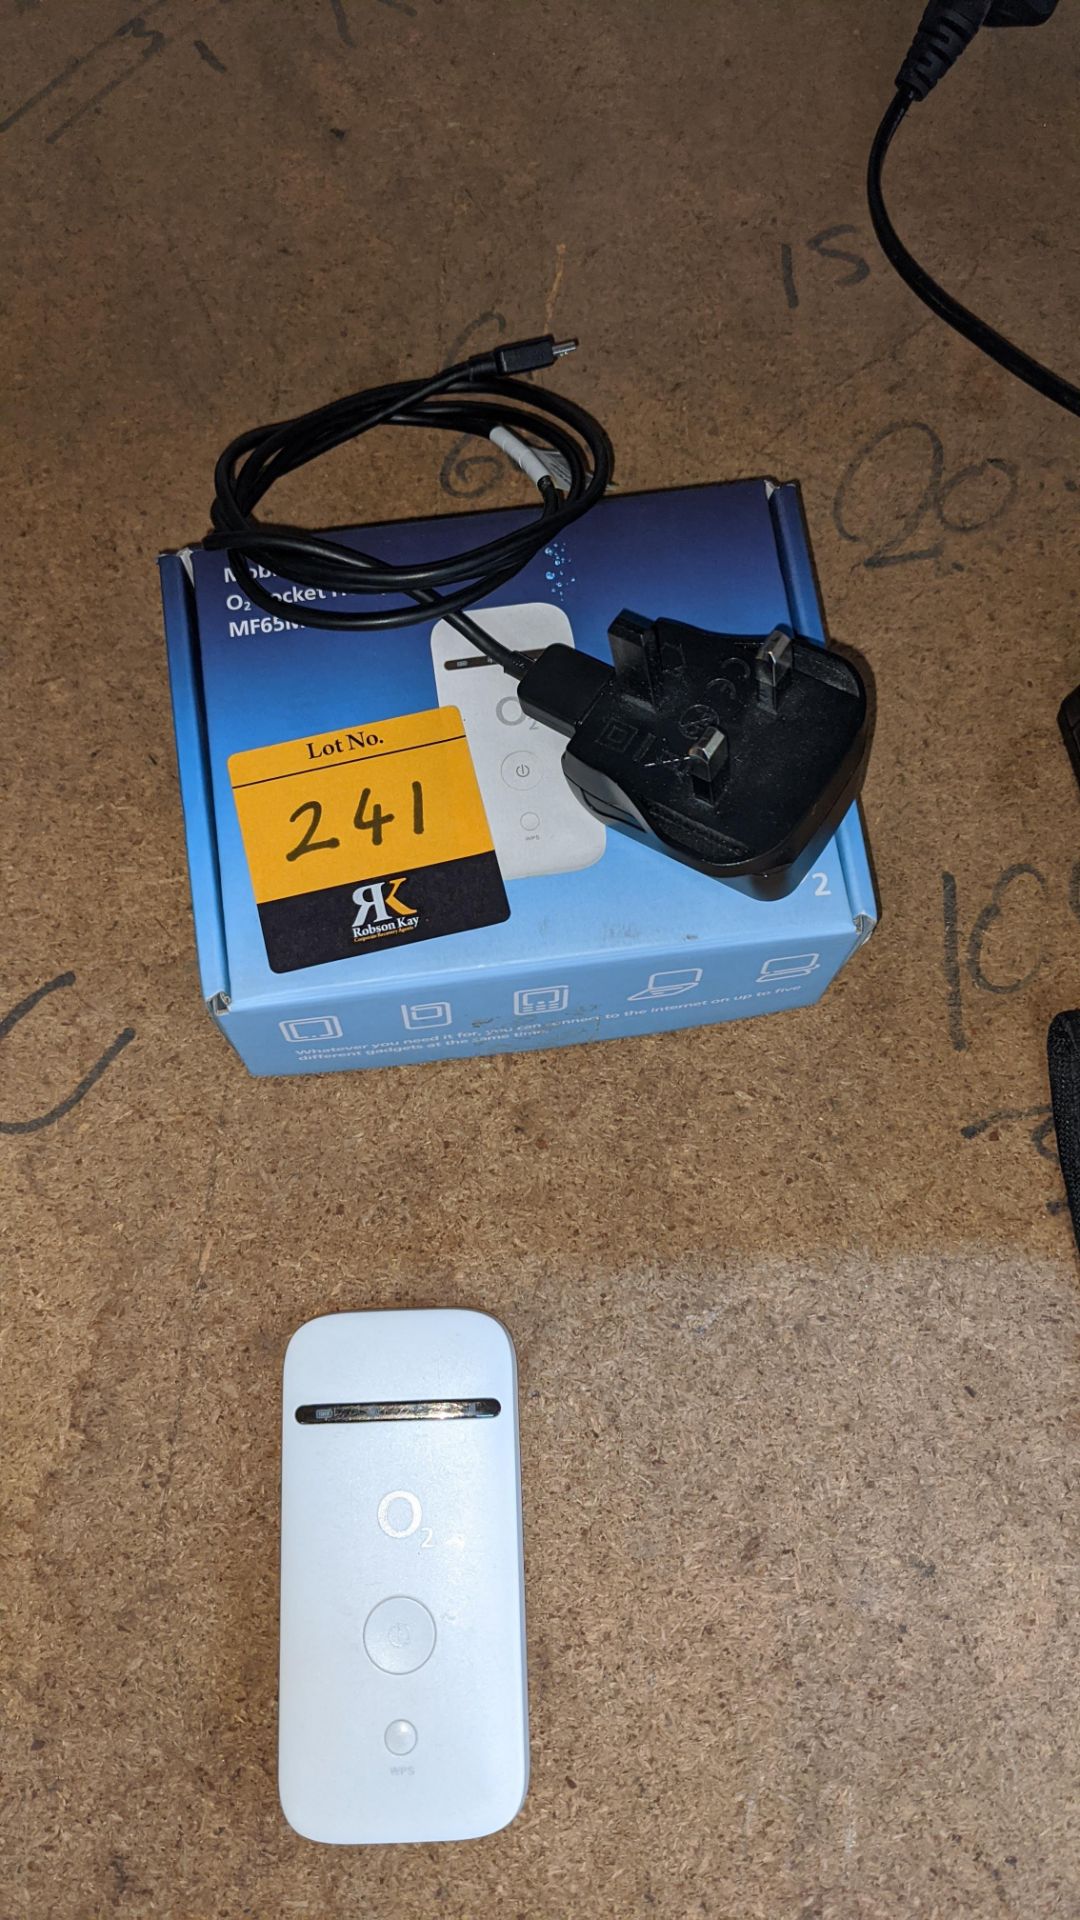 Mobile Wi-Fi O2 pocket hot spot including box & charger - Image 3 of 5